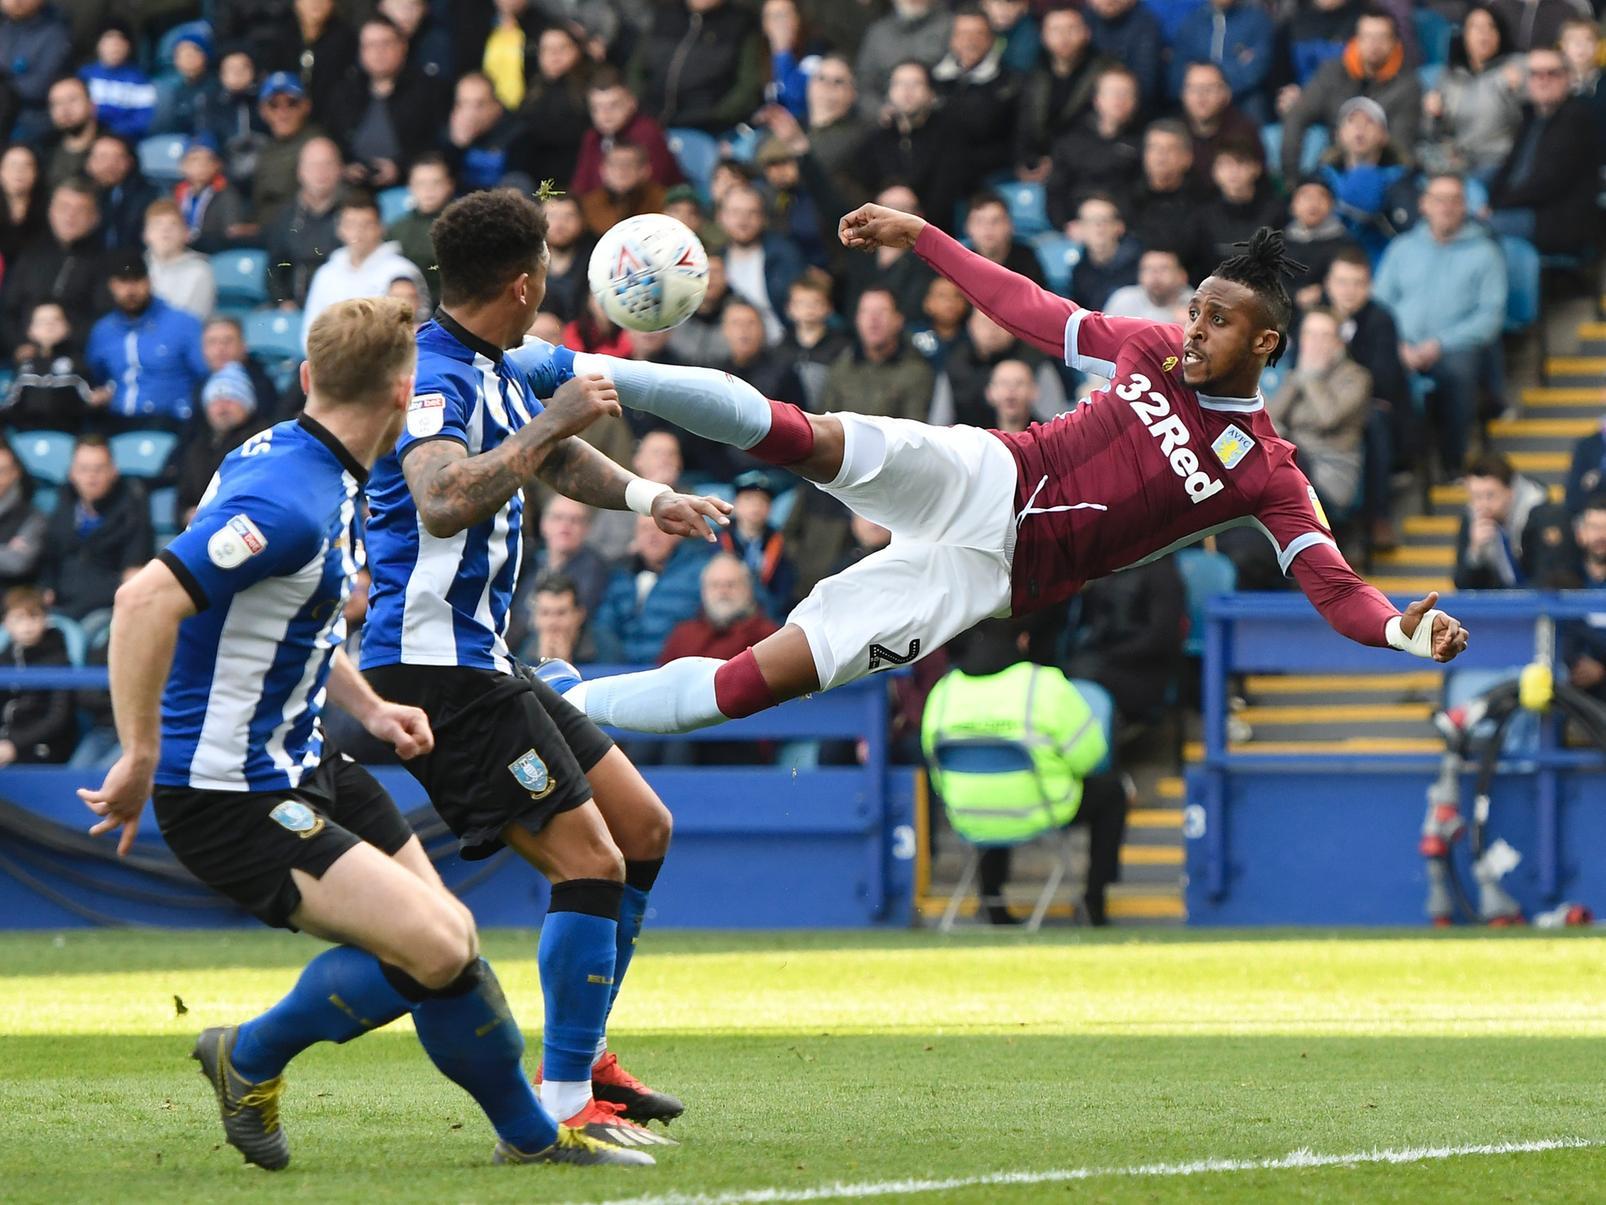 Cardiff City are understood to be among a number of sides interested signing Aston Villa's striker Jonathan Kodjia, who will be out of contract next summer. (Football Insider)